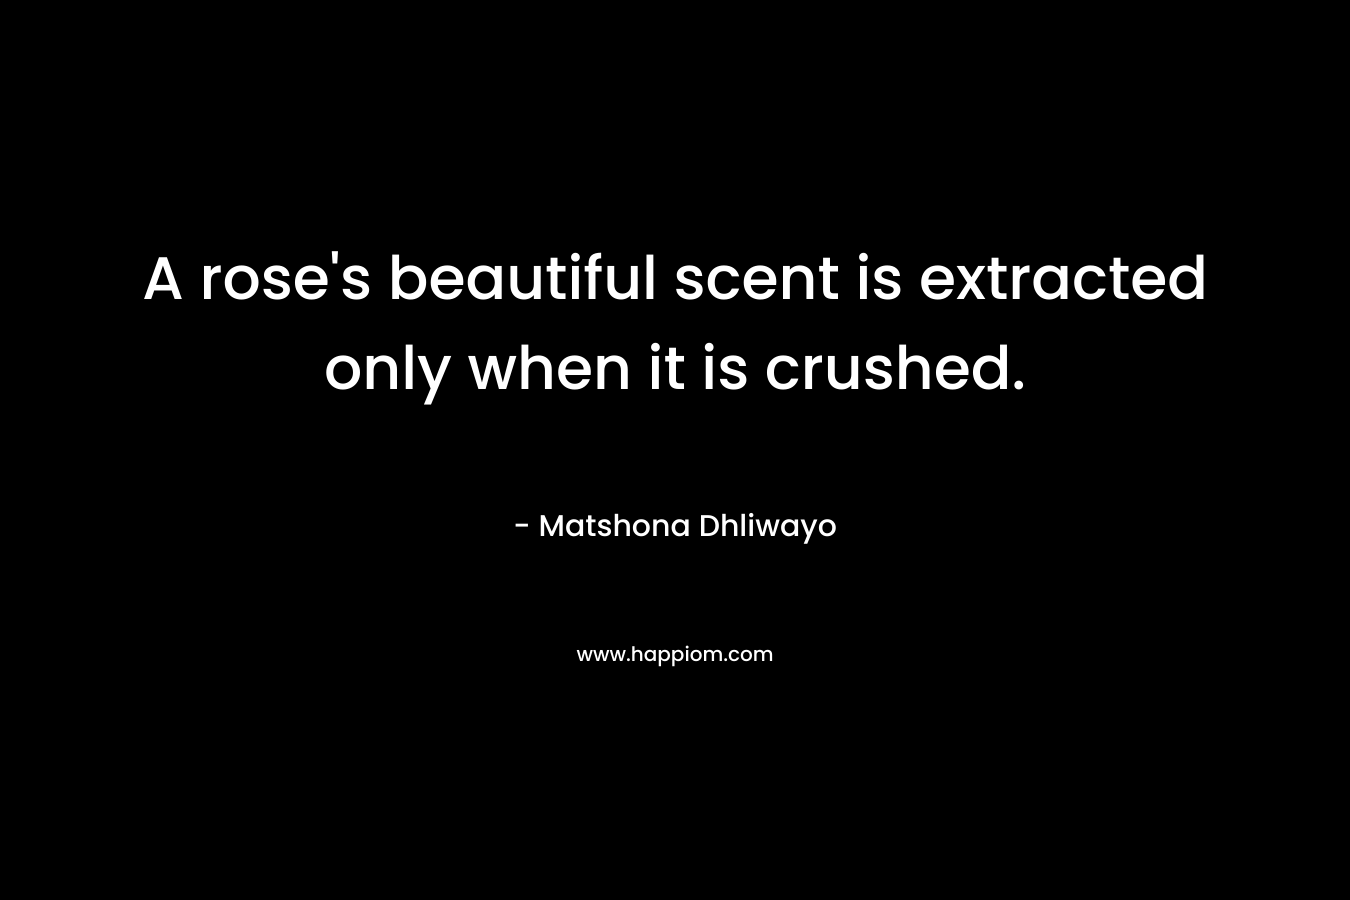 A rose's beautiful scent is extracted only when it is crushed.